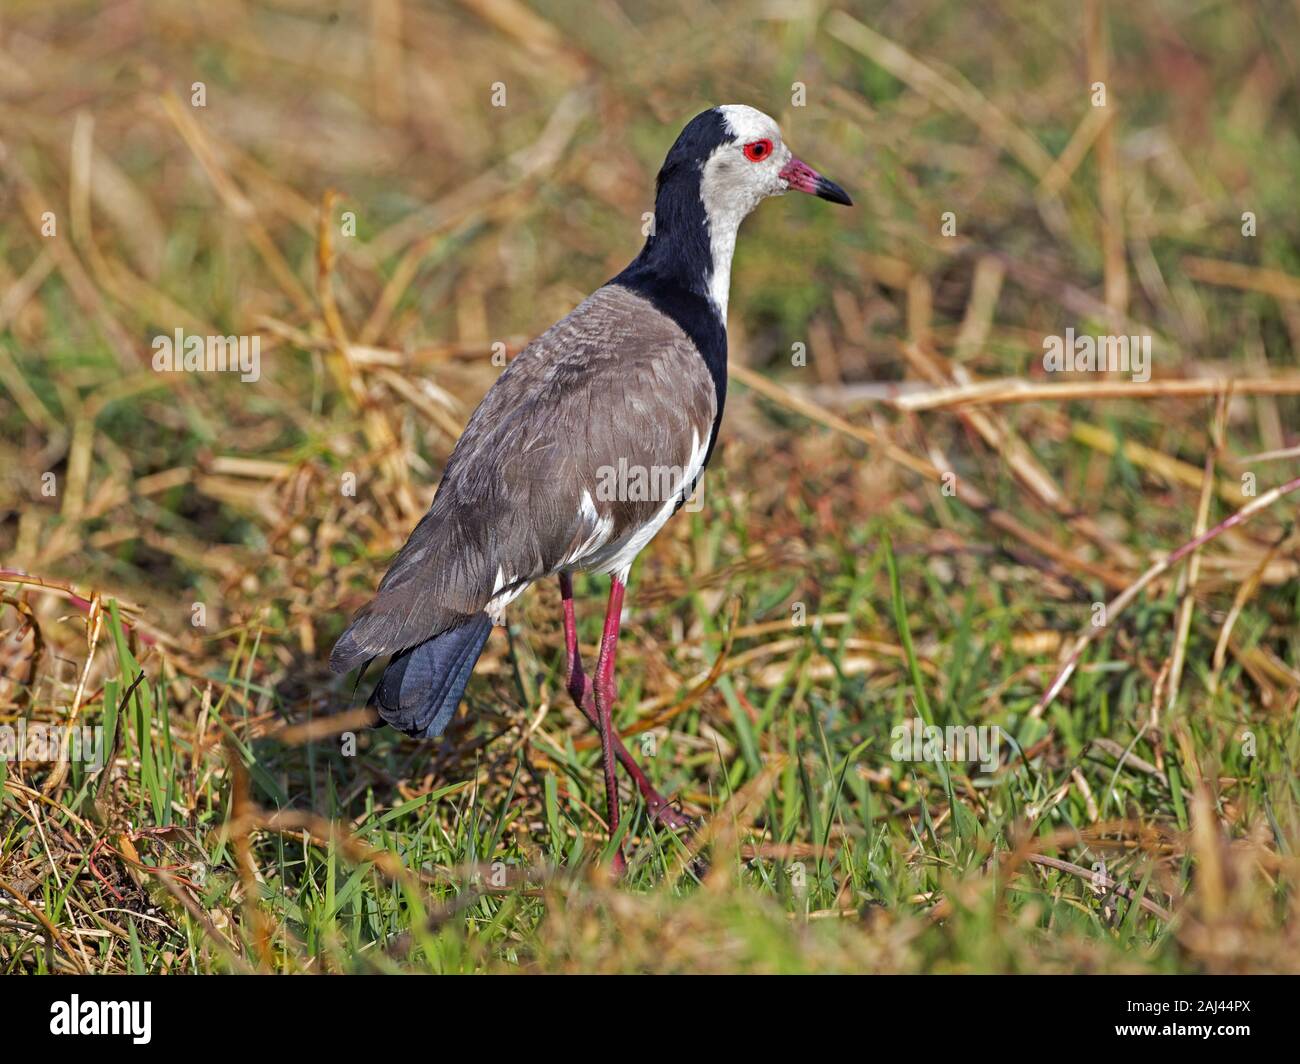 Long-toed lapwing, long-toed plover standing Stock Photo